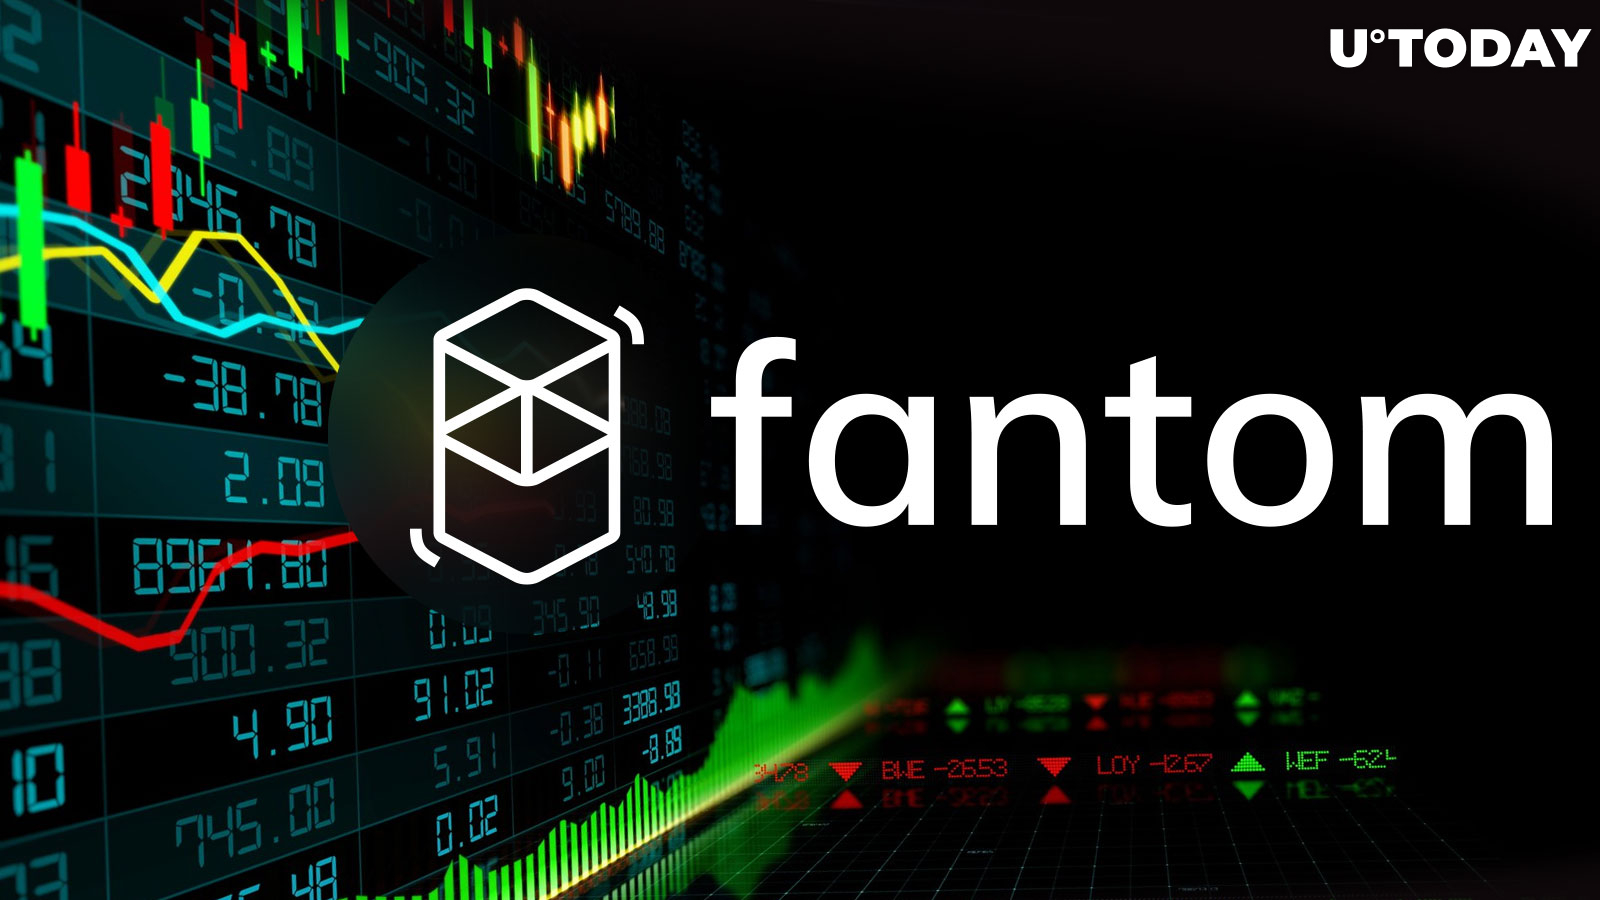 Fantom (FTM) Breaks Key Resistance at $0.47, Analyst Signals Strong Rally Ahead